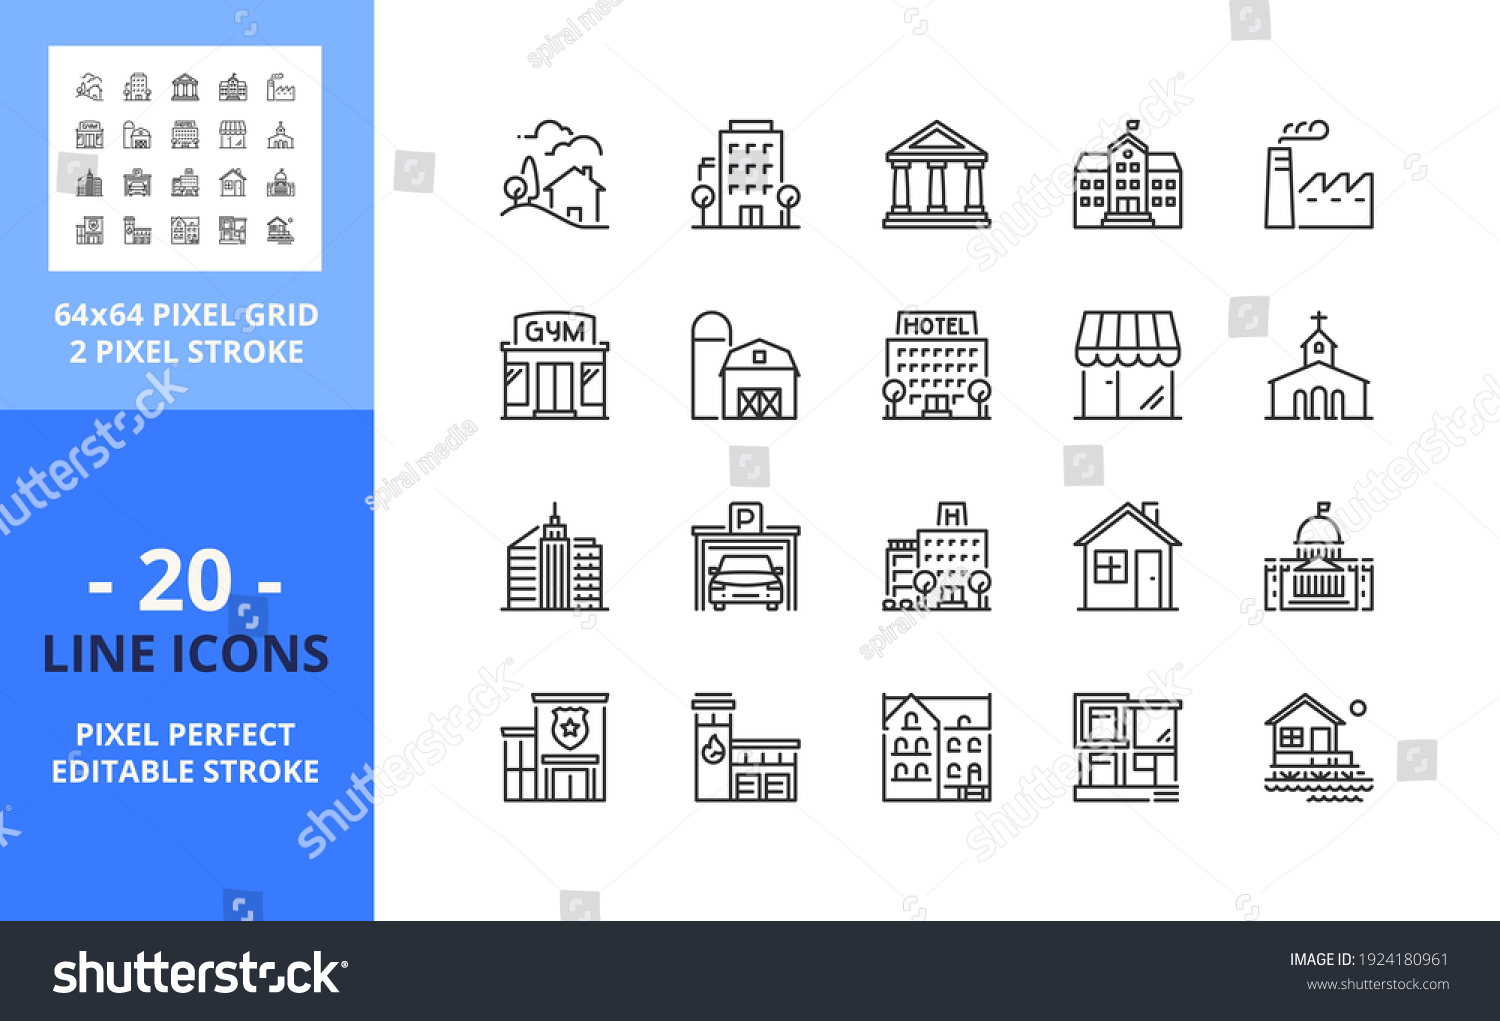 SVG of Line icons about buildings. Contains such icons as decoration, bells, stocking and Santa Claus. Editable stroke. Vector - 64 pixel perfect grid svg